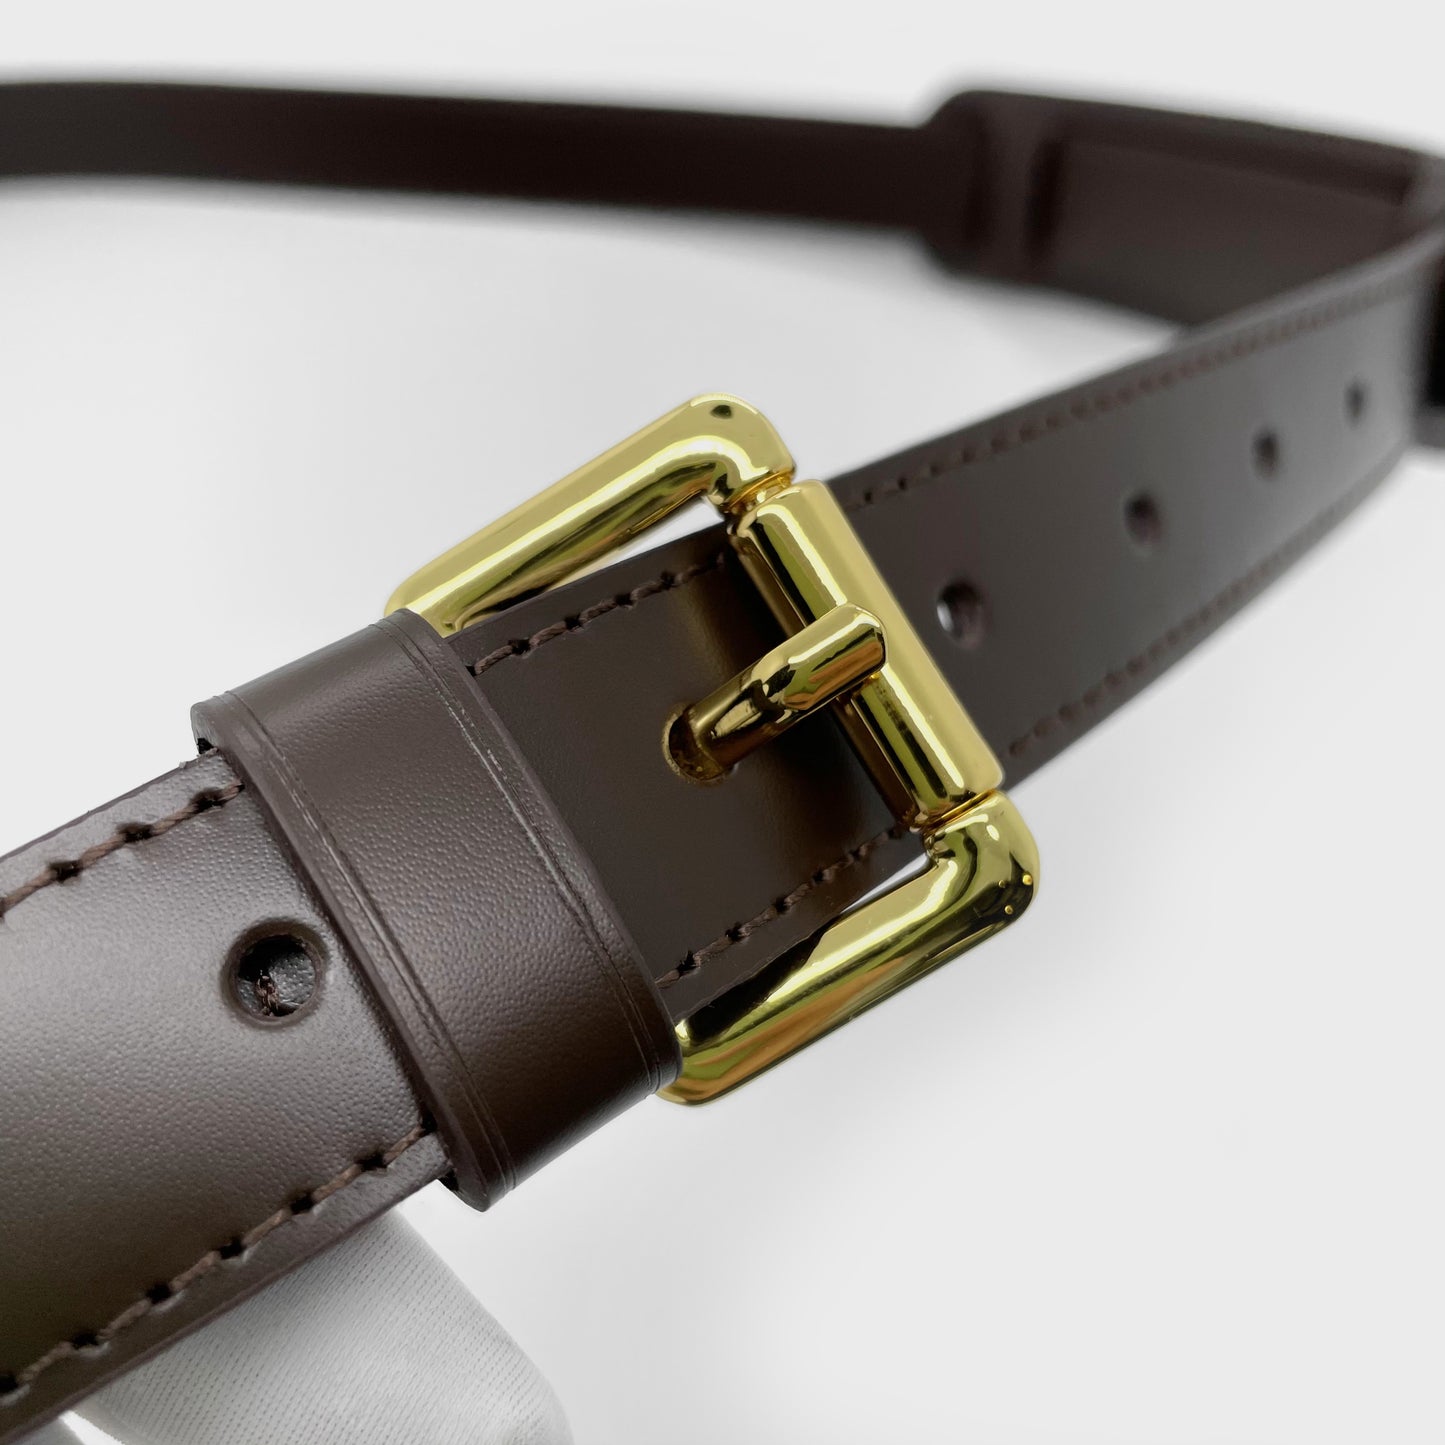 Adjustable Leather Strap in treated leather - 4cm wide